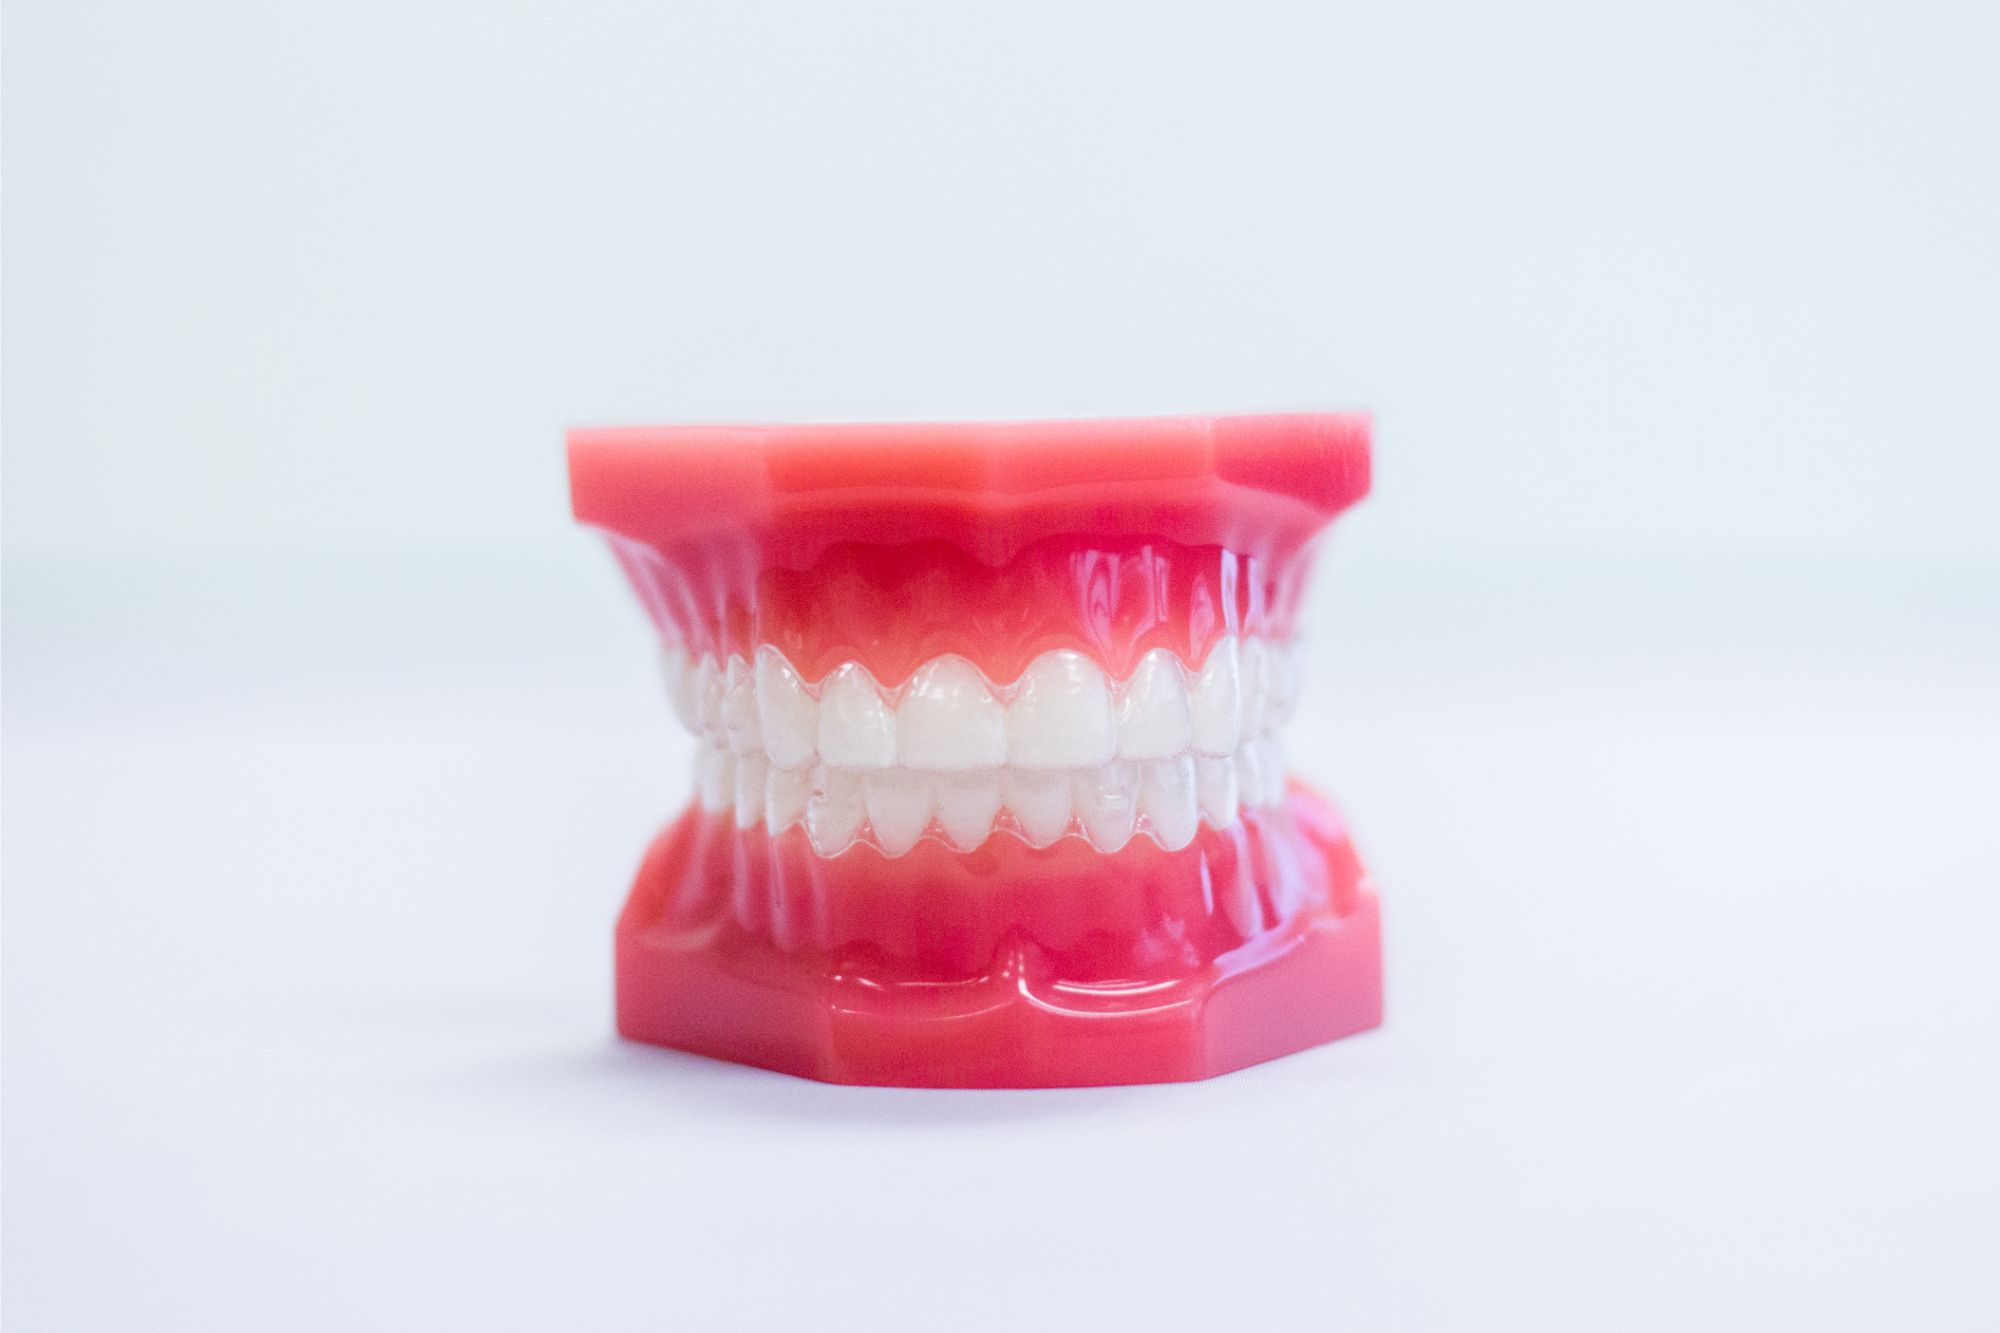 clear aligners typodont